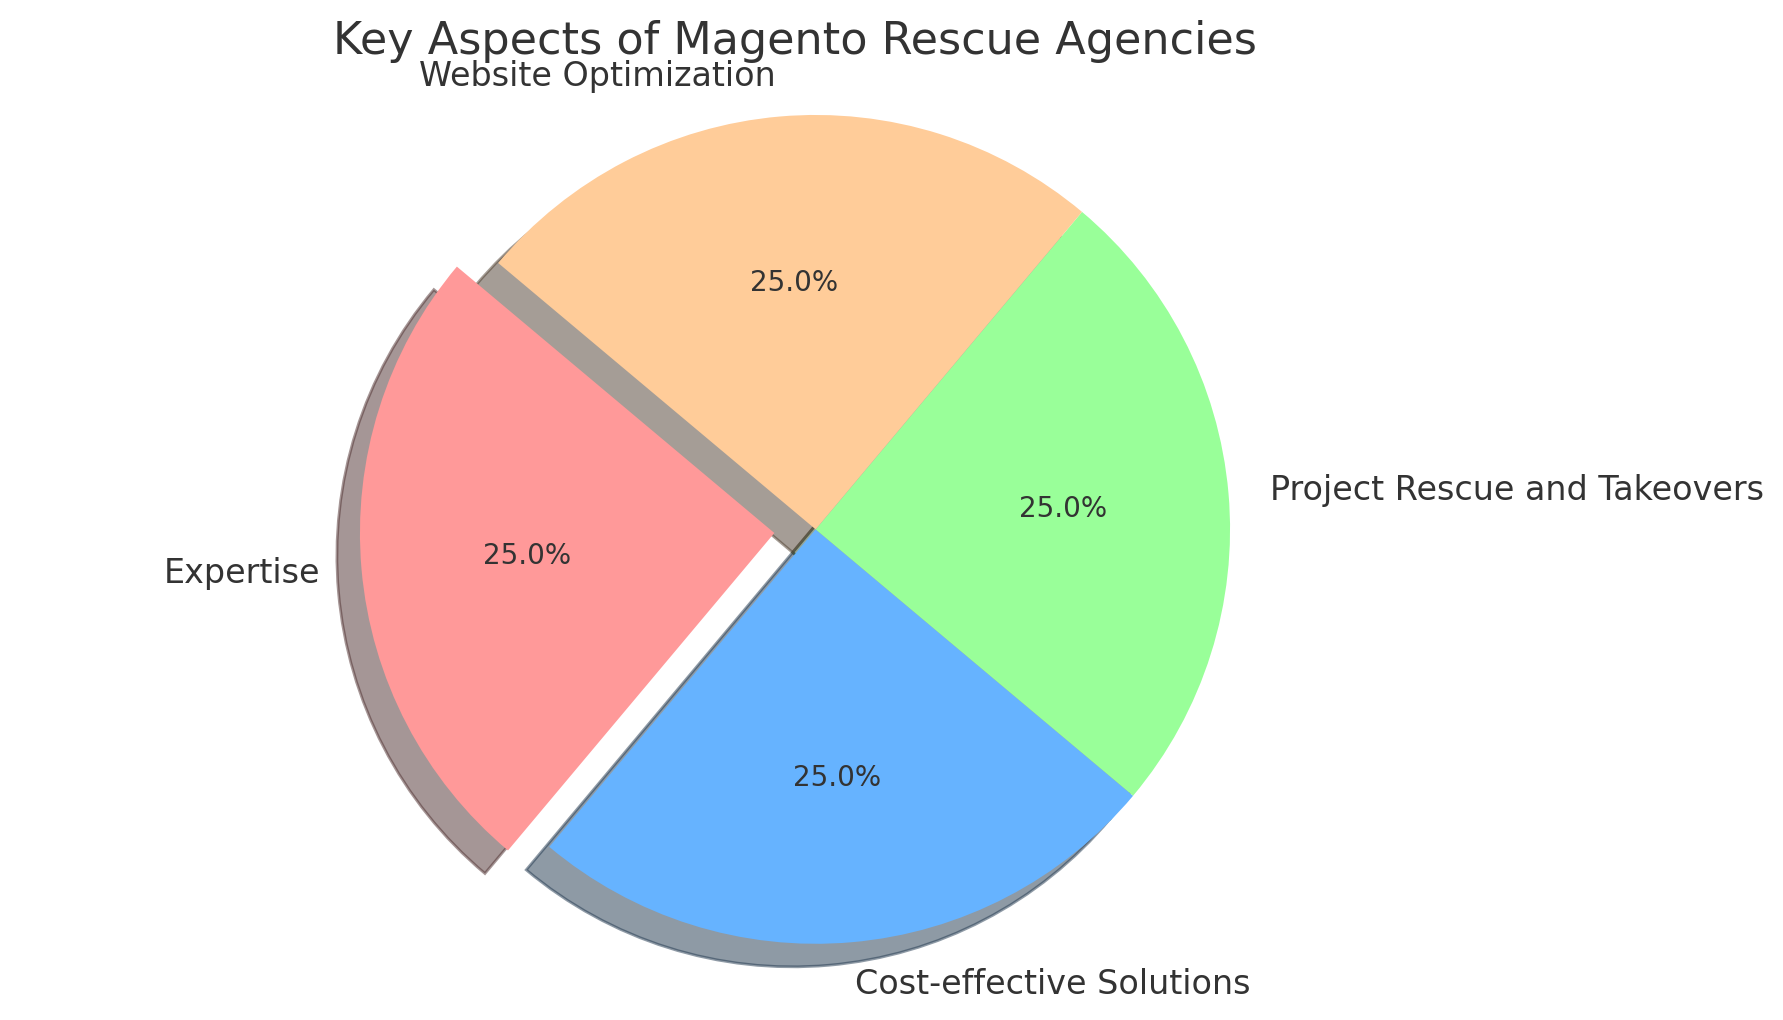 Challenges Addressed by Magento Rescue Agencies